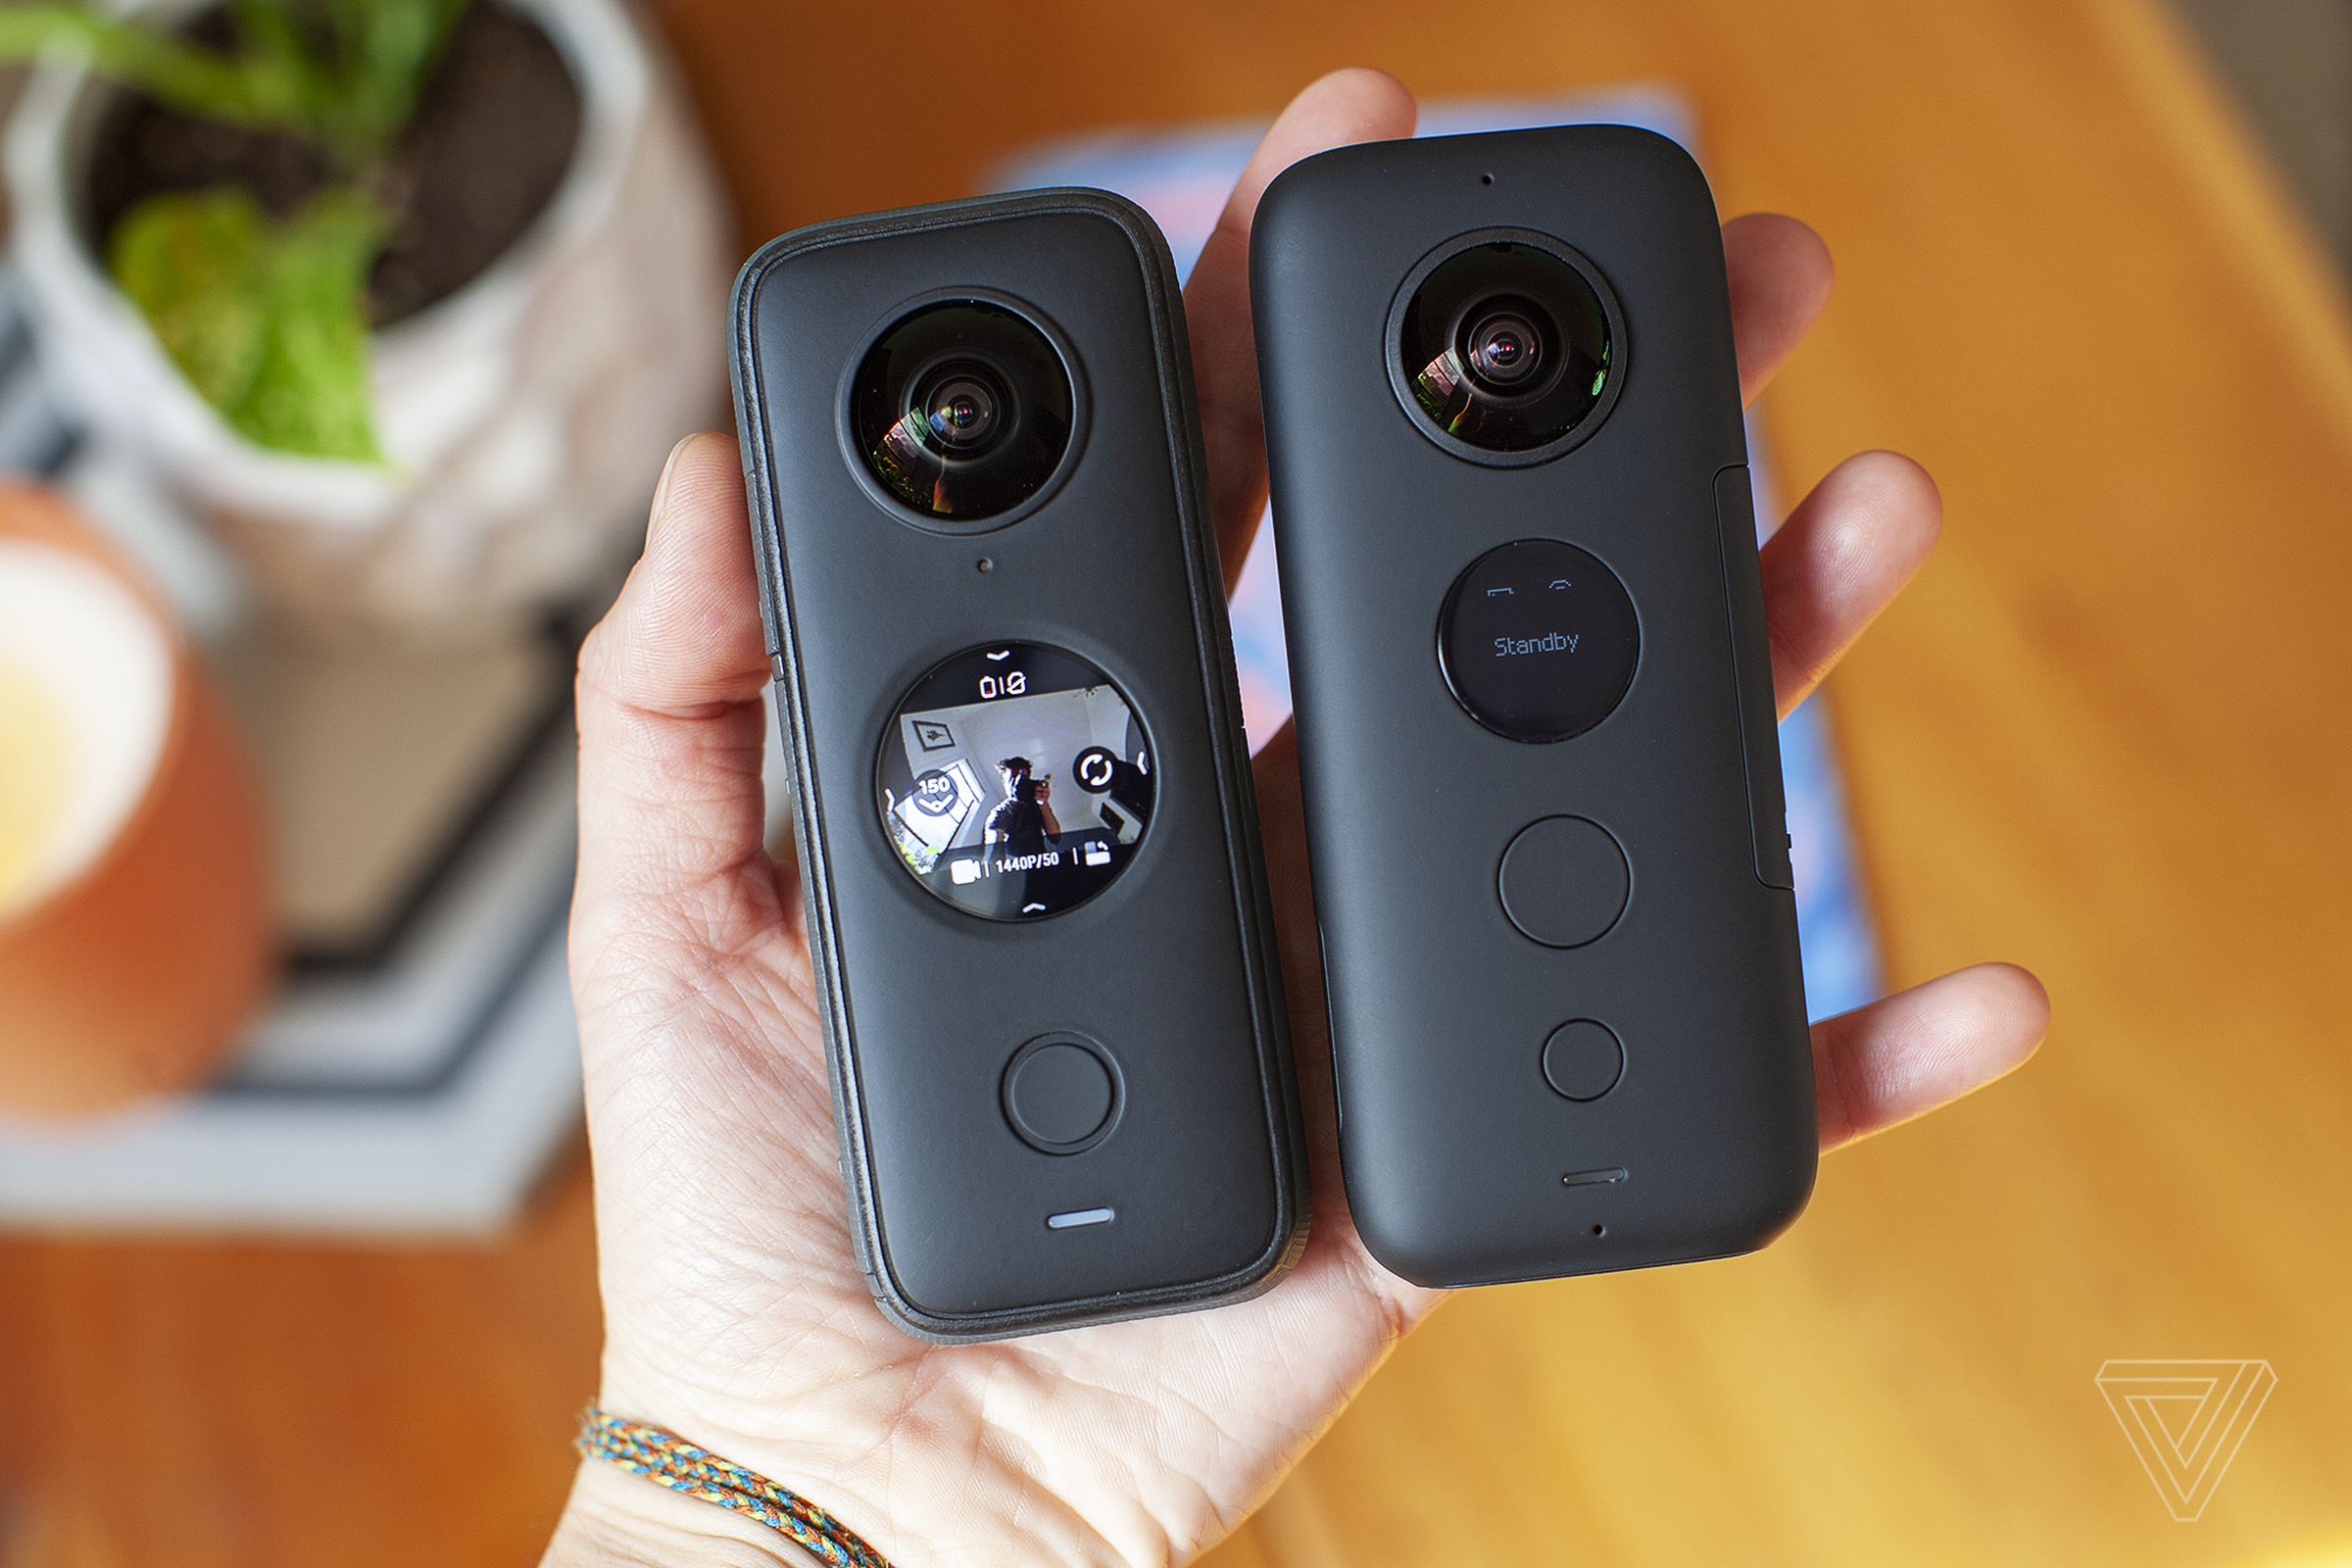 The One X2 is slightly smaller than its predecessor, the﻿ Insta360 One X.